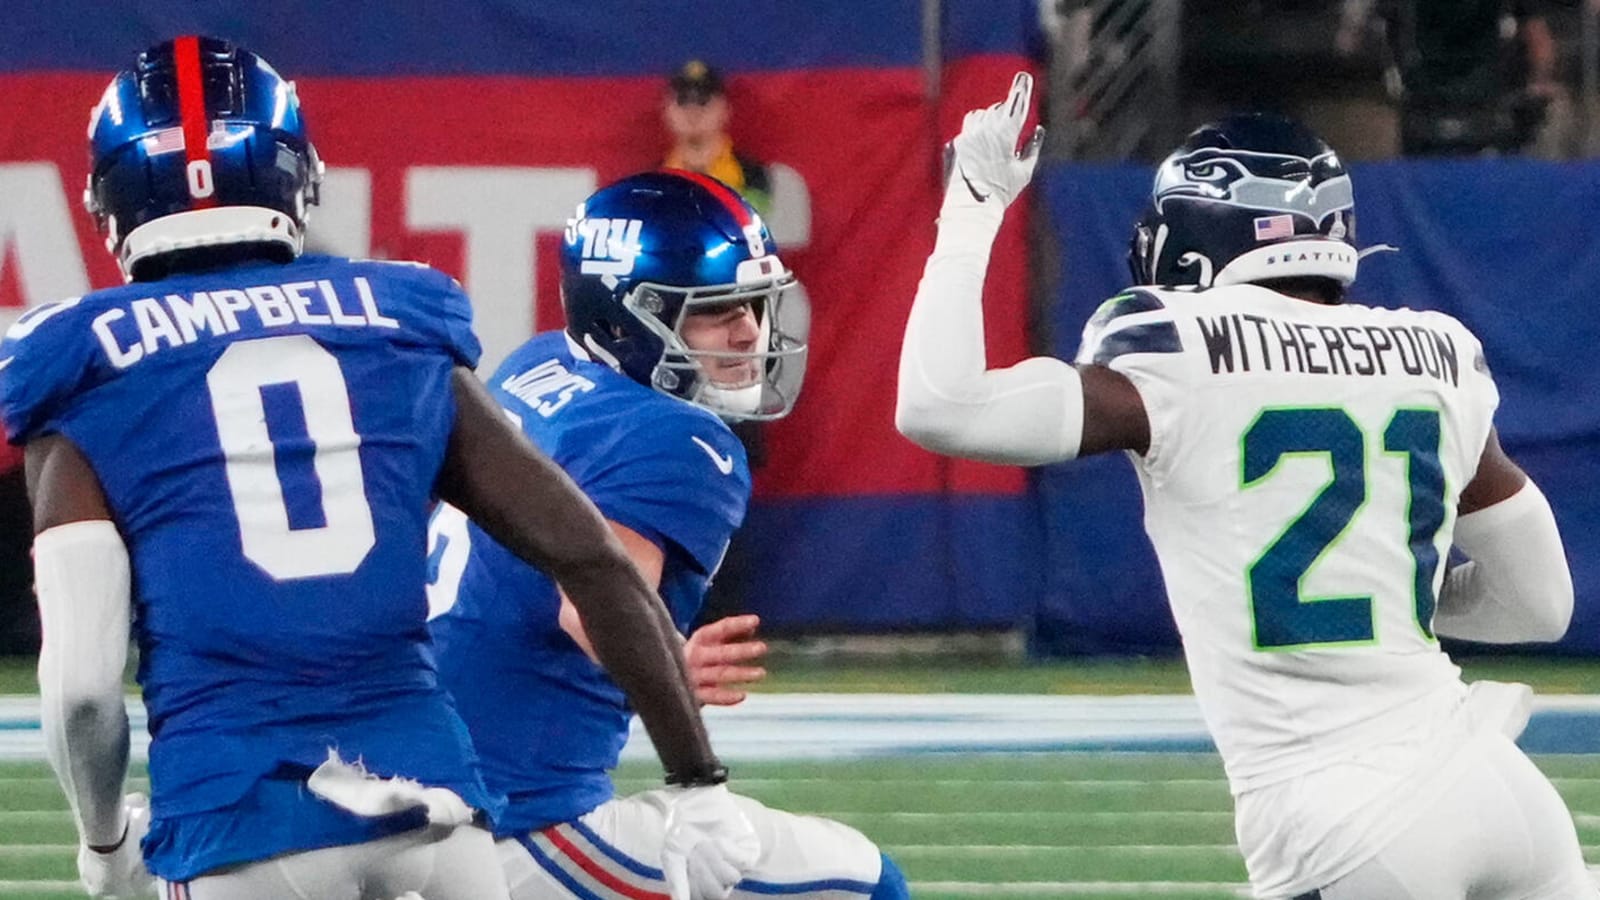 Watch: Seahawks' Witherspoon notches pick-six on 'MNF'